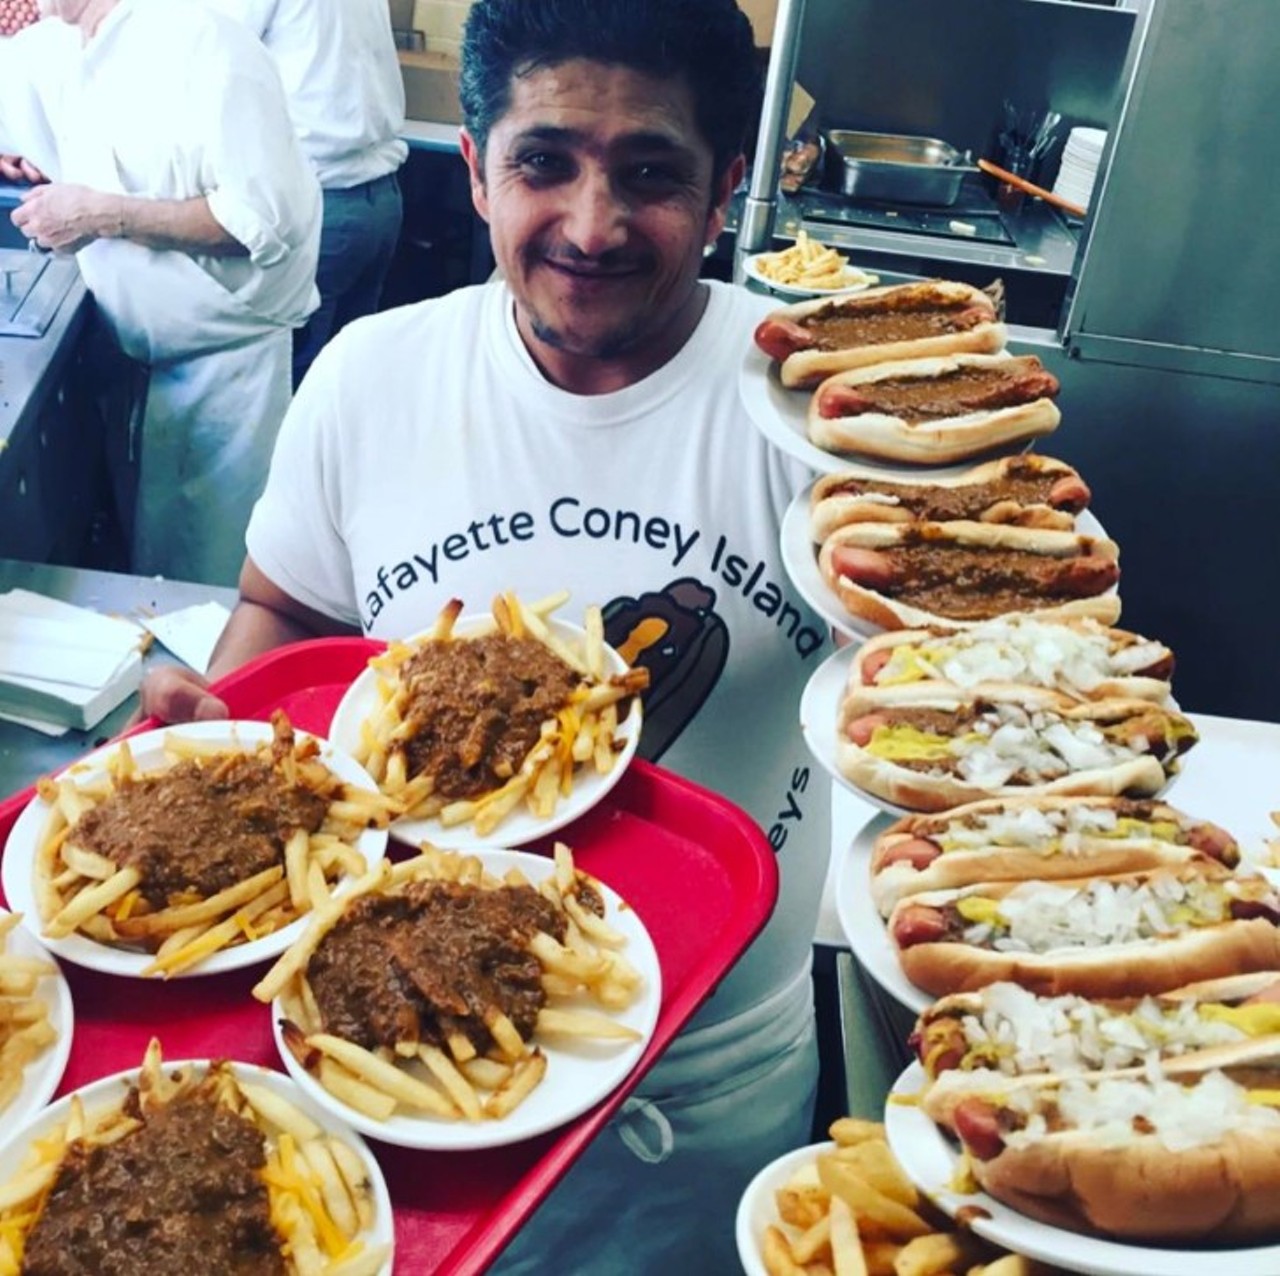 @faisal_ali
118 W Lafayette Blvd, Detroit
Faisal Ali, a legendary waiter at Lafayette Coney, shares some of the best moments and people at the joint.